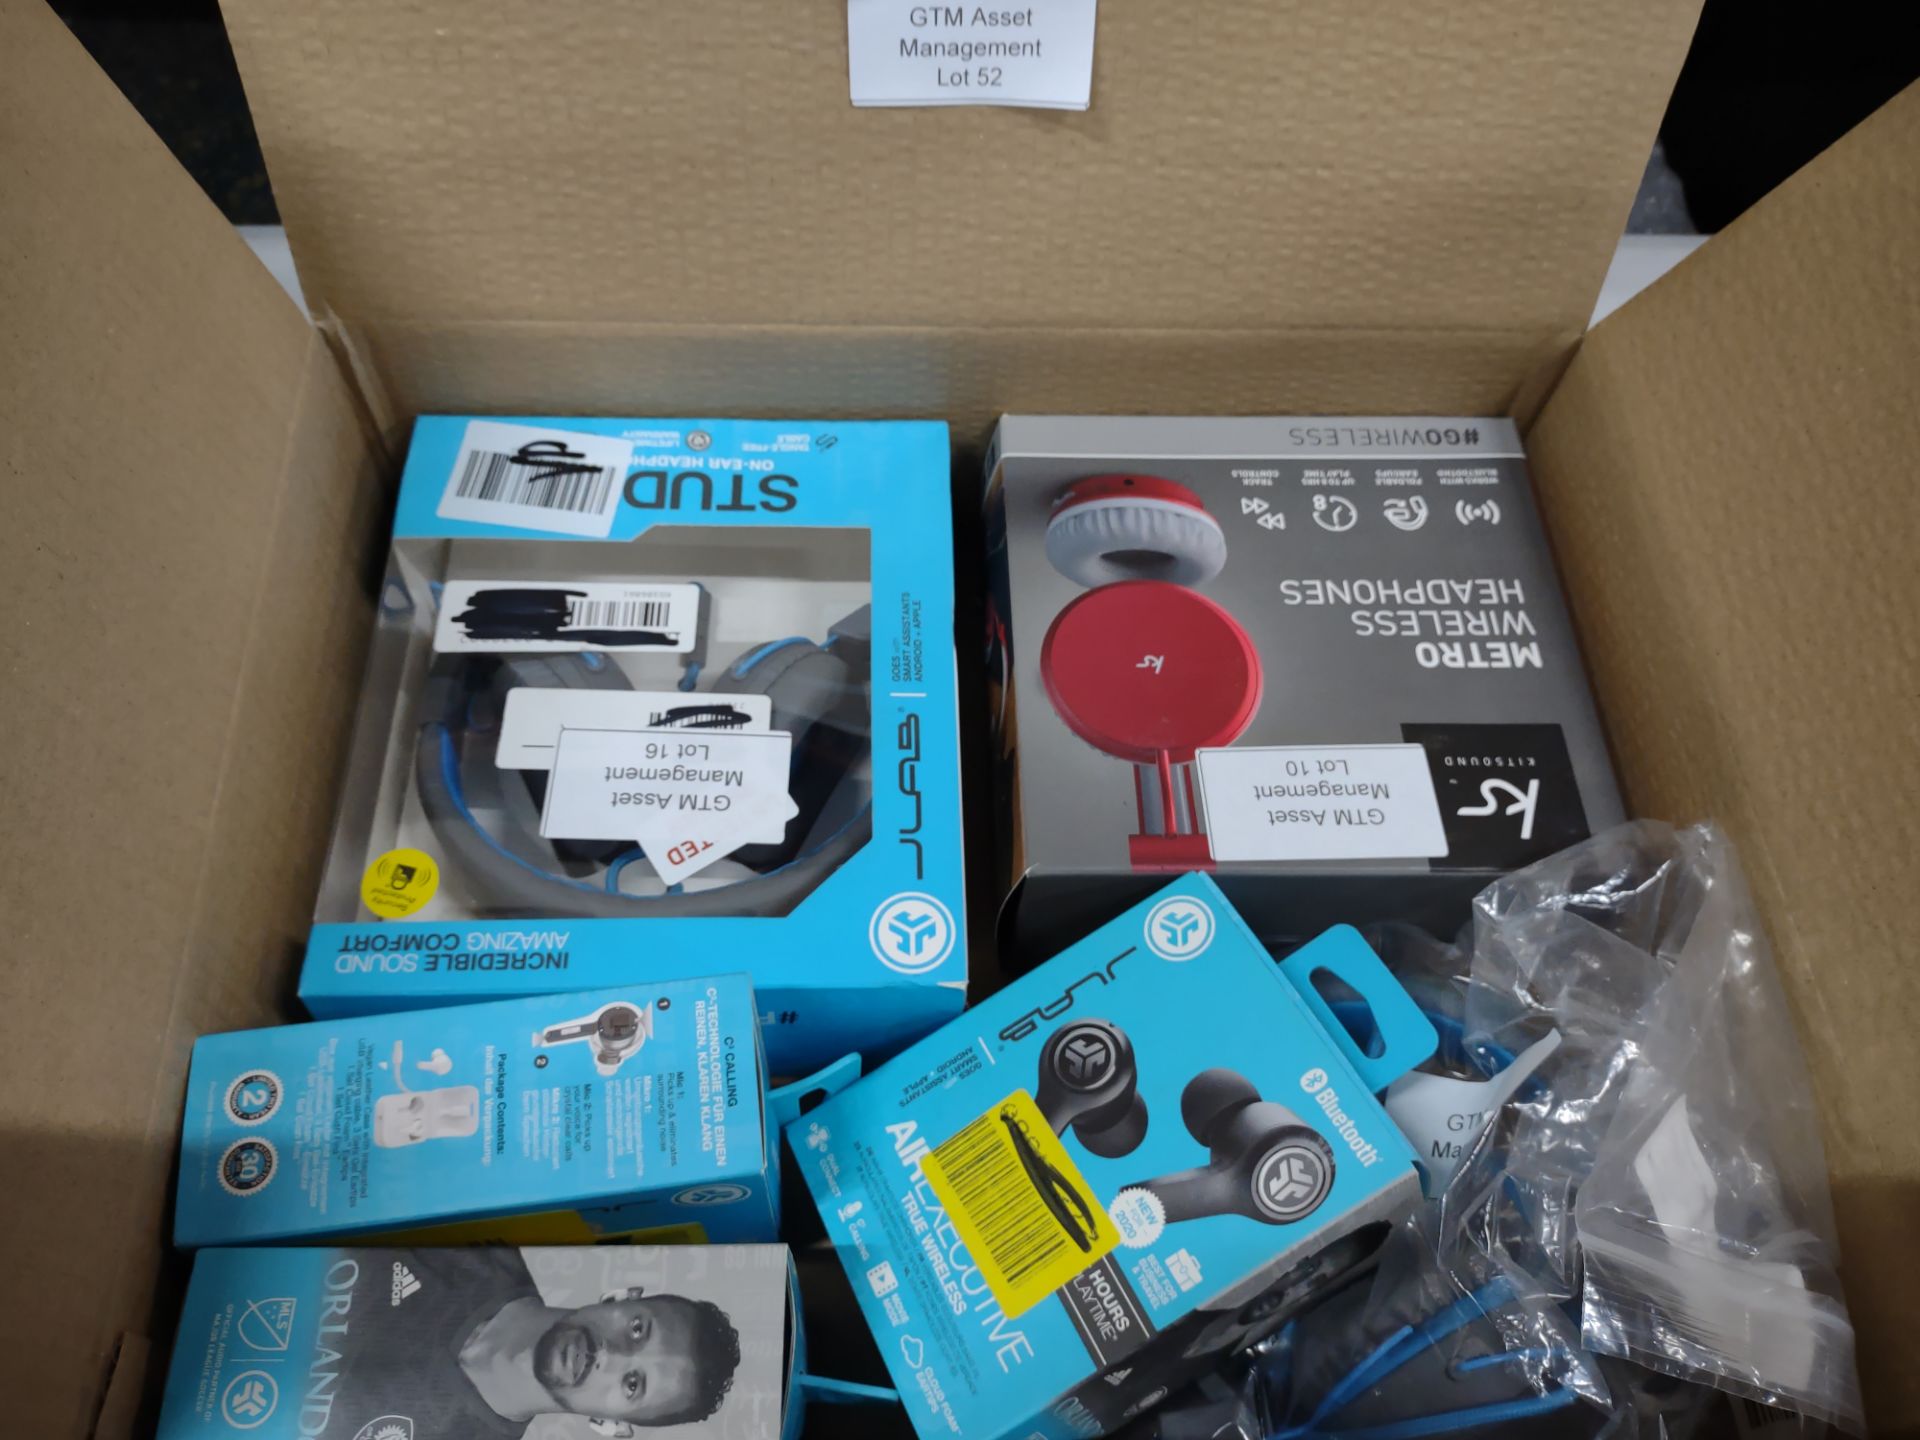 Large Assorted Box of Mixed Tech/electricals. APPROX. RRP £200 - £500. - GRADE U - Image 2 of 2